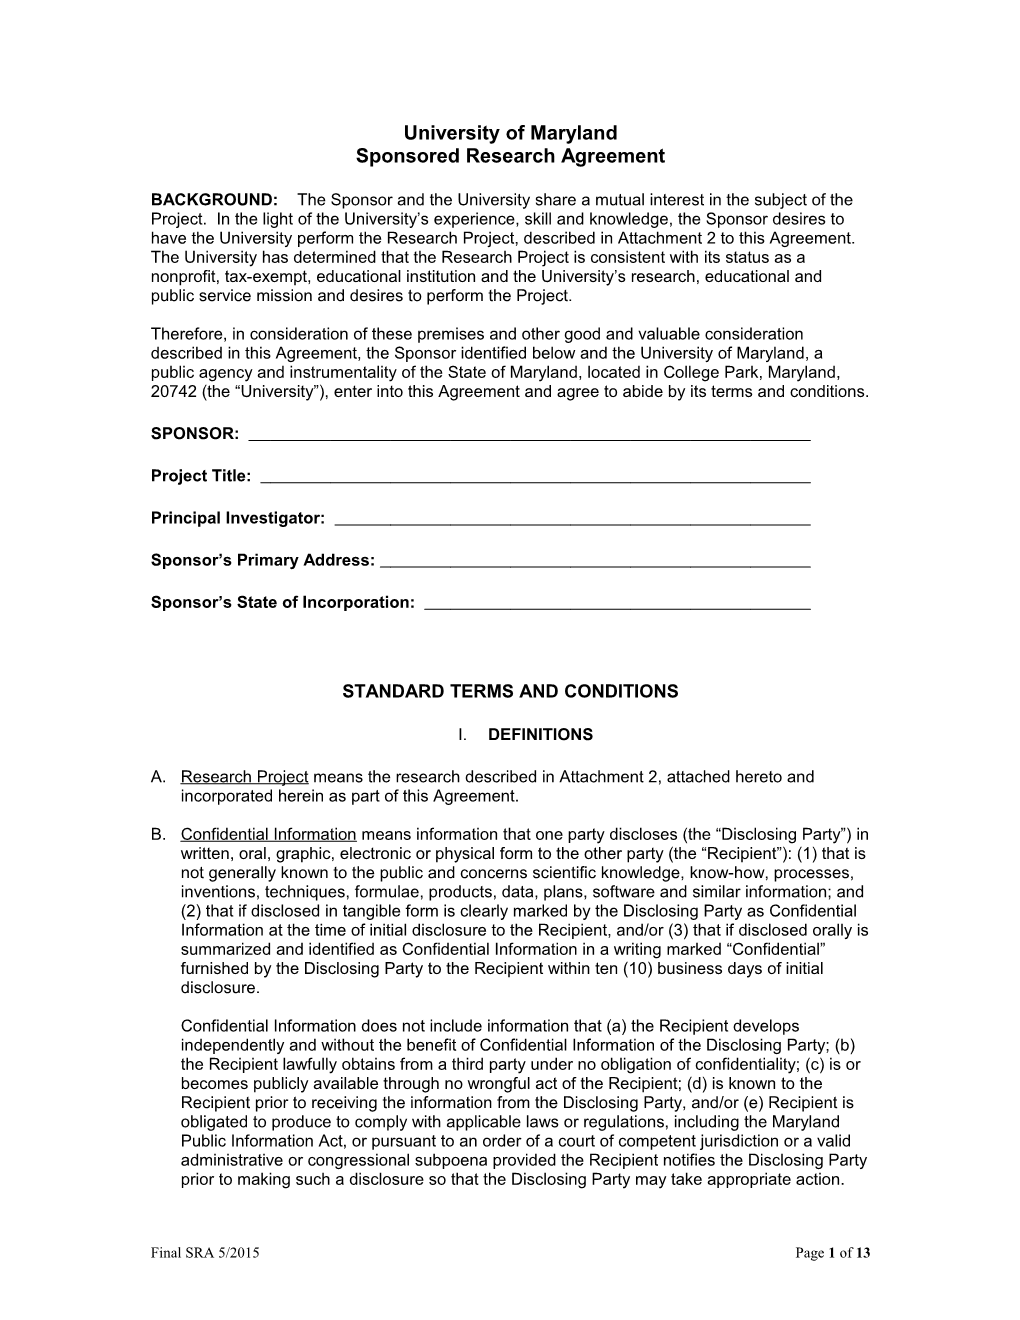 Sample Industry-Research Agreement